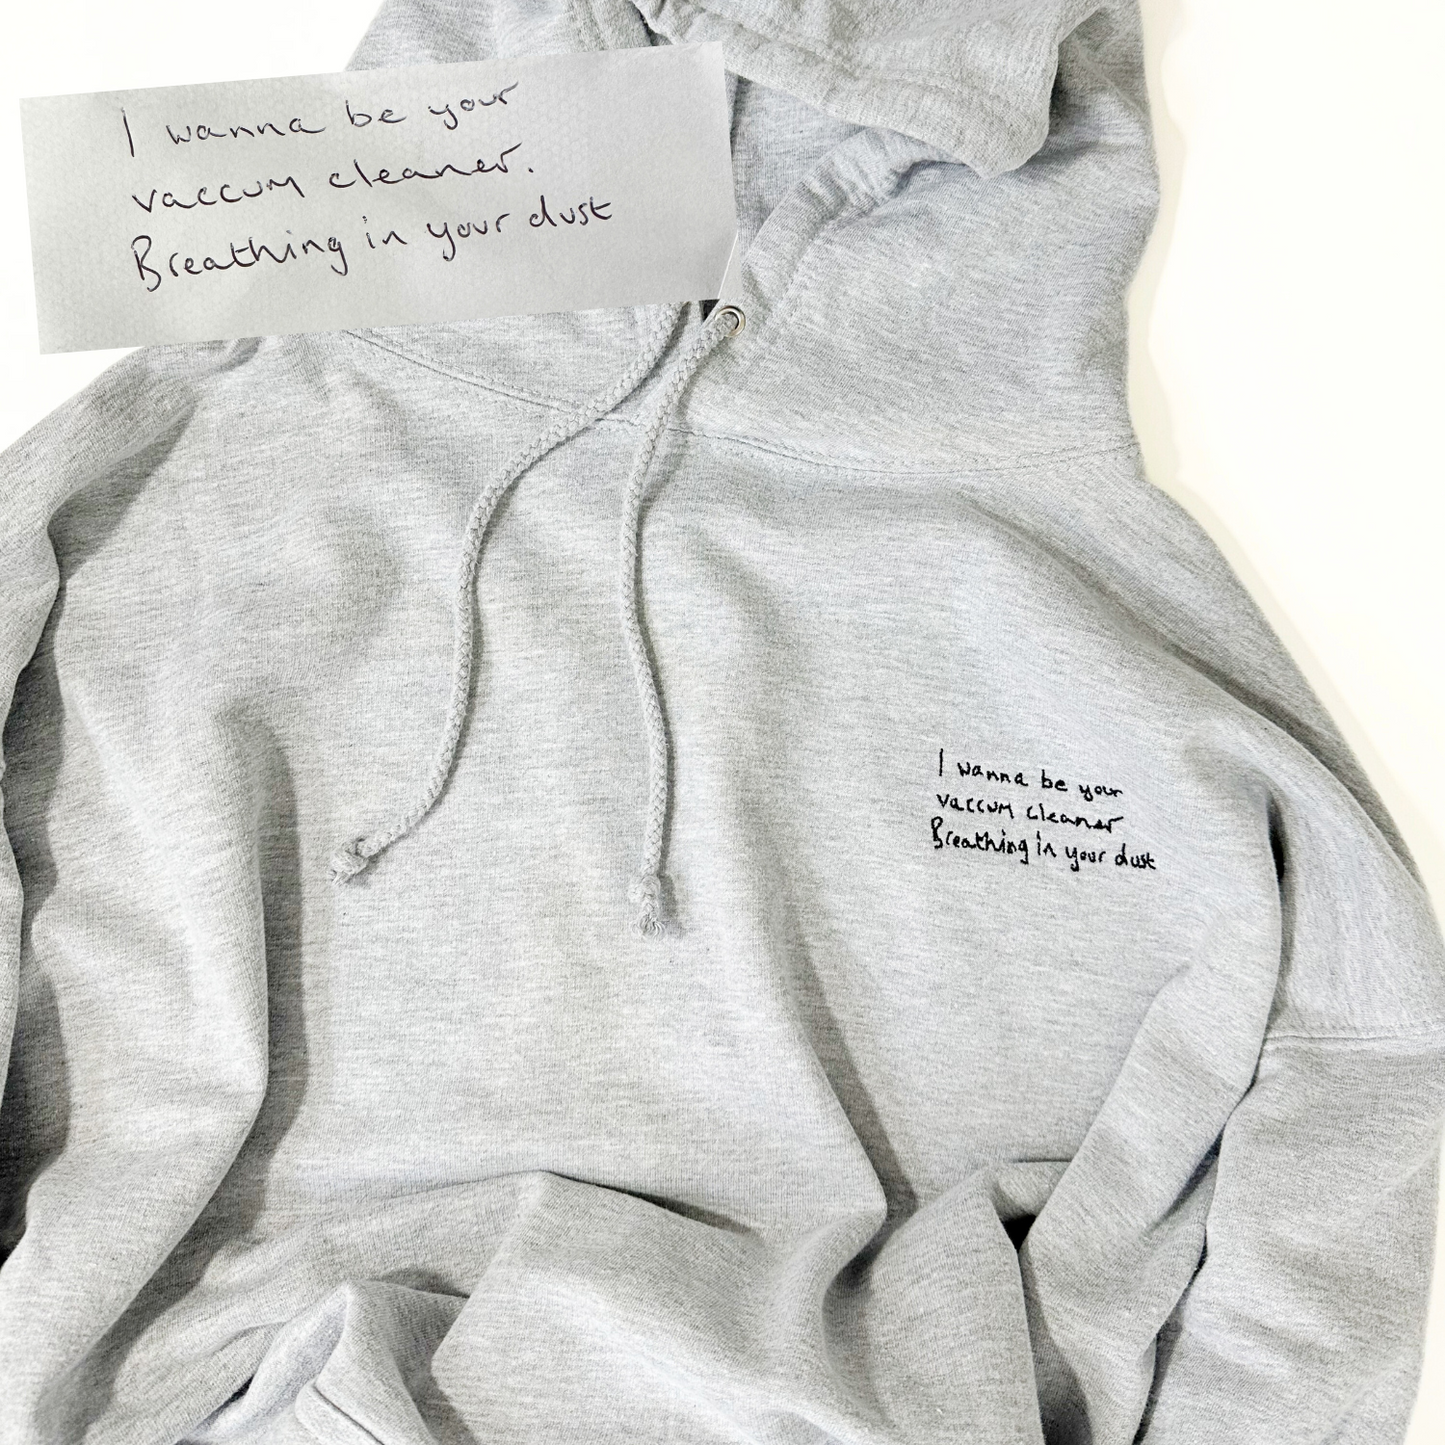 A high-quality hoodie showcasing a beautifully embroidered handwritten note. The heartfelt message is delicately stitched onto the hoodie, adding a personal touch to this unique and meaningful piece of apparel